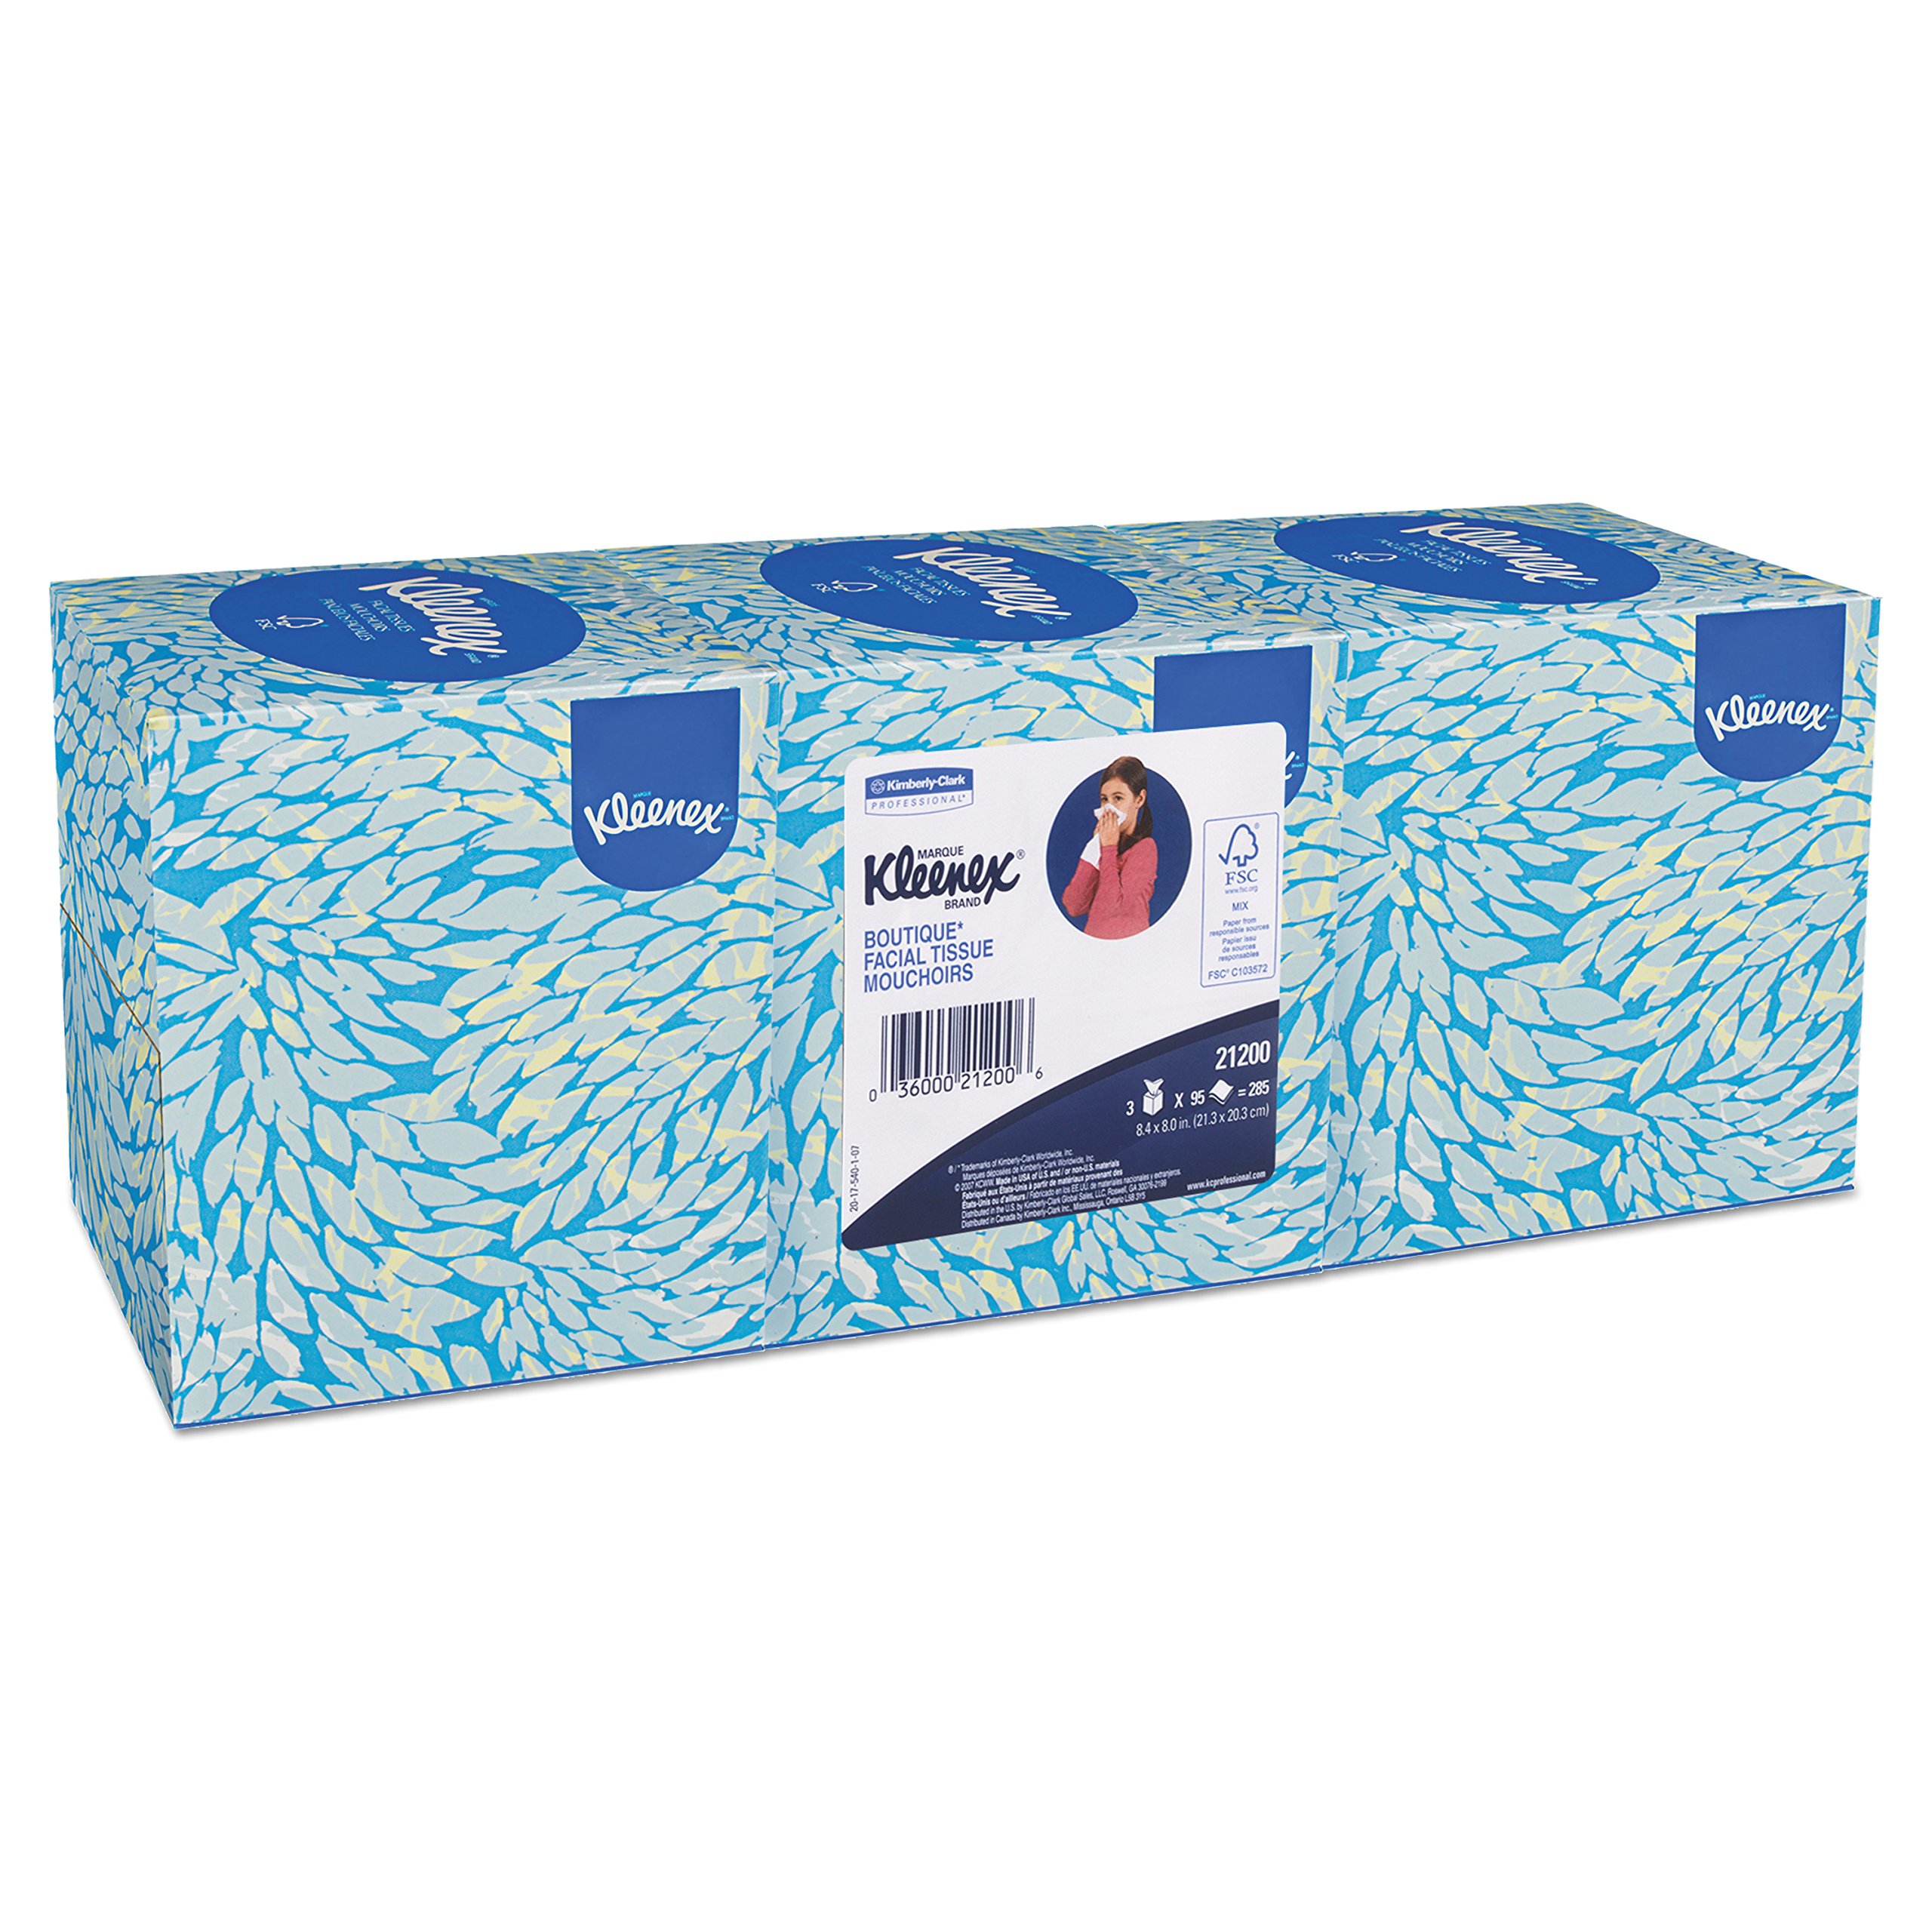 Kleenex 21200CT Facial Tissue, 2-Ply, Pop-Up Box, 3 Boxes per Pack (Case of 12 Packs)